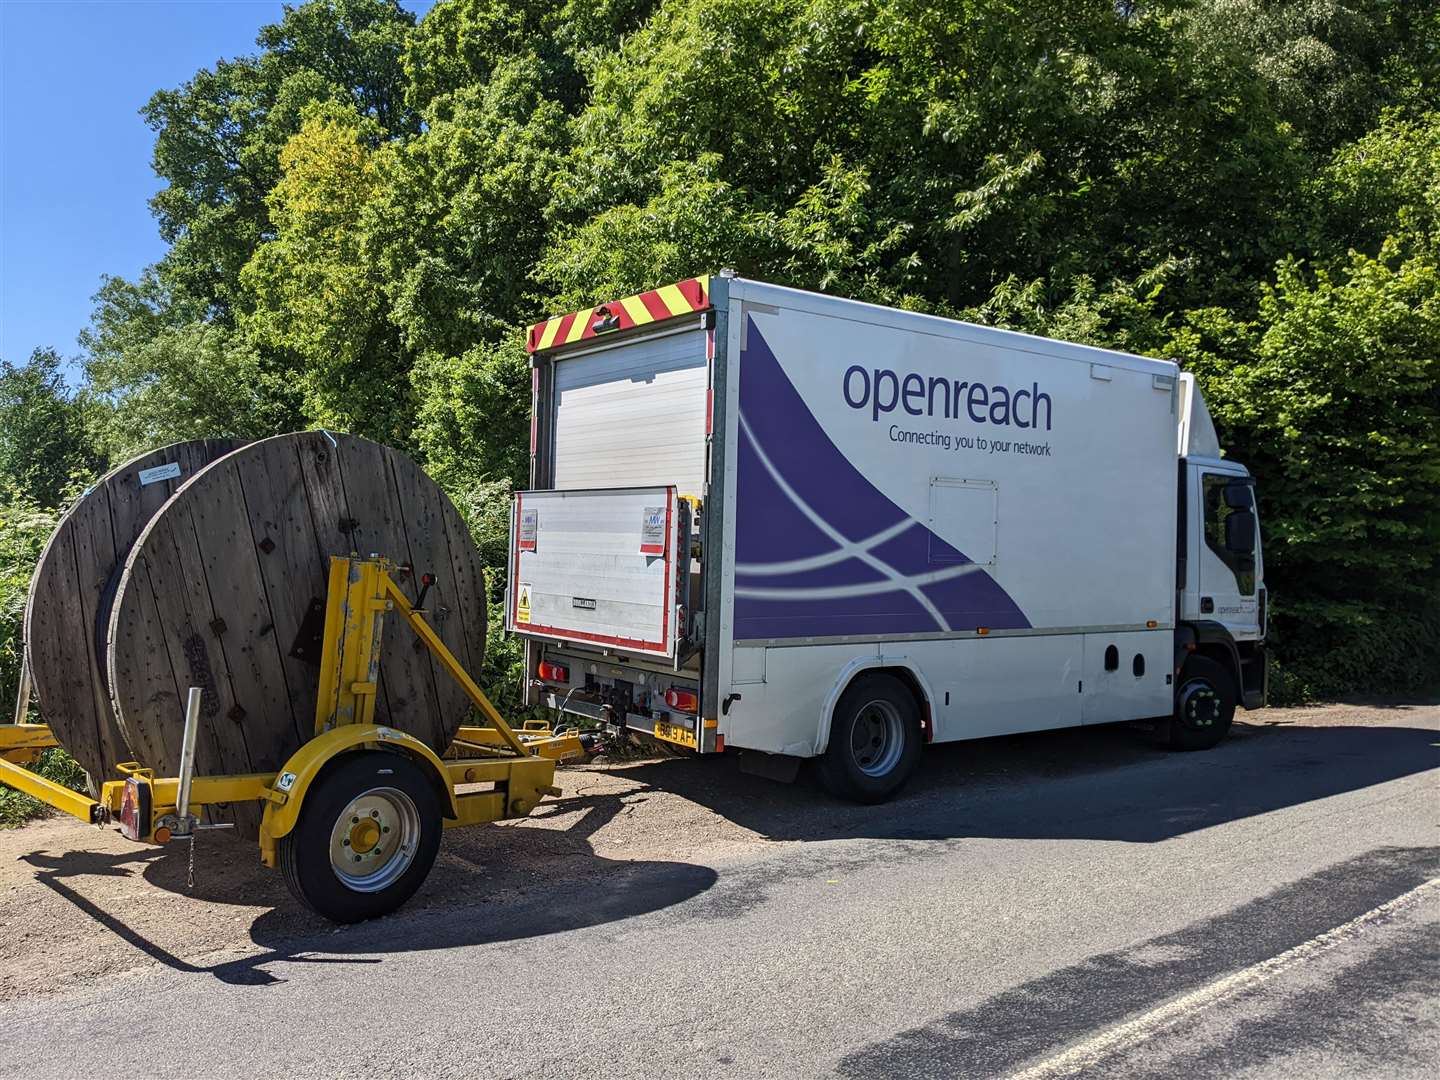 BT Openreach at work replacing stolen cables